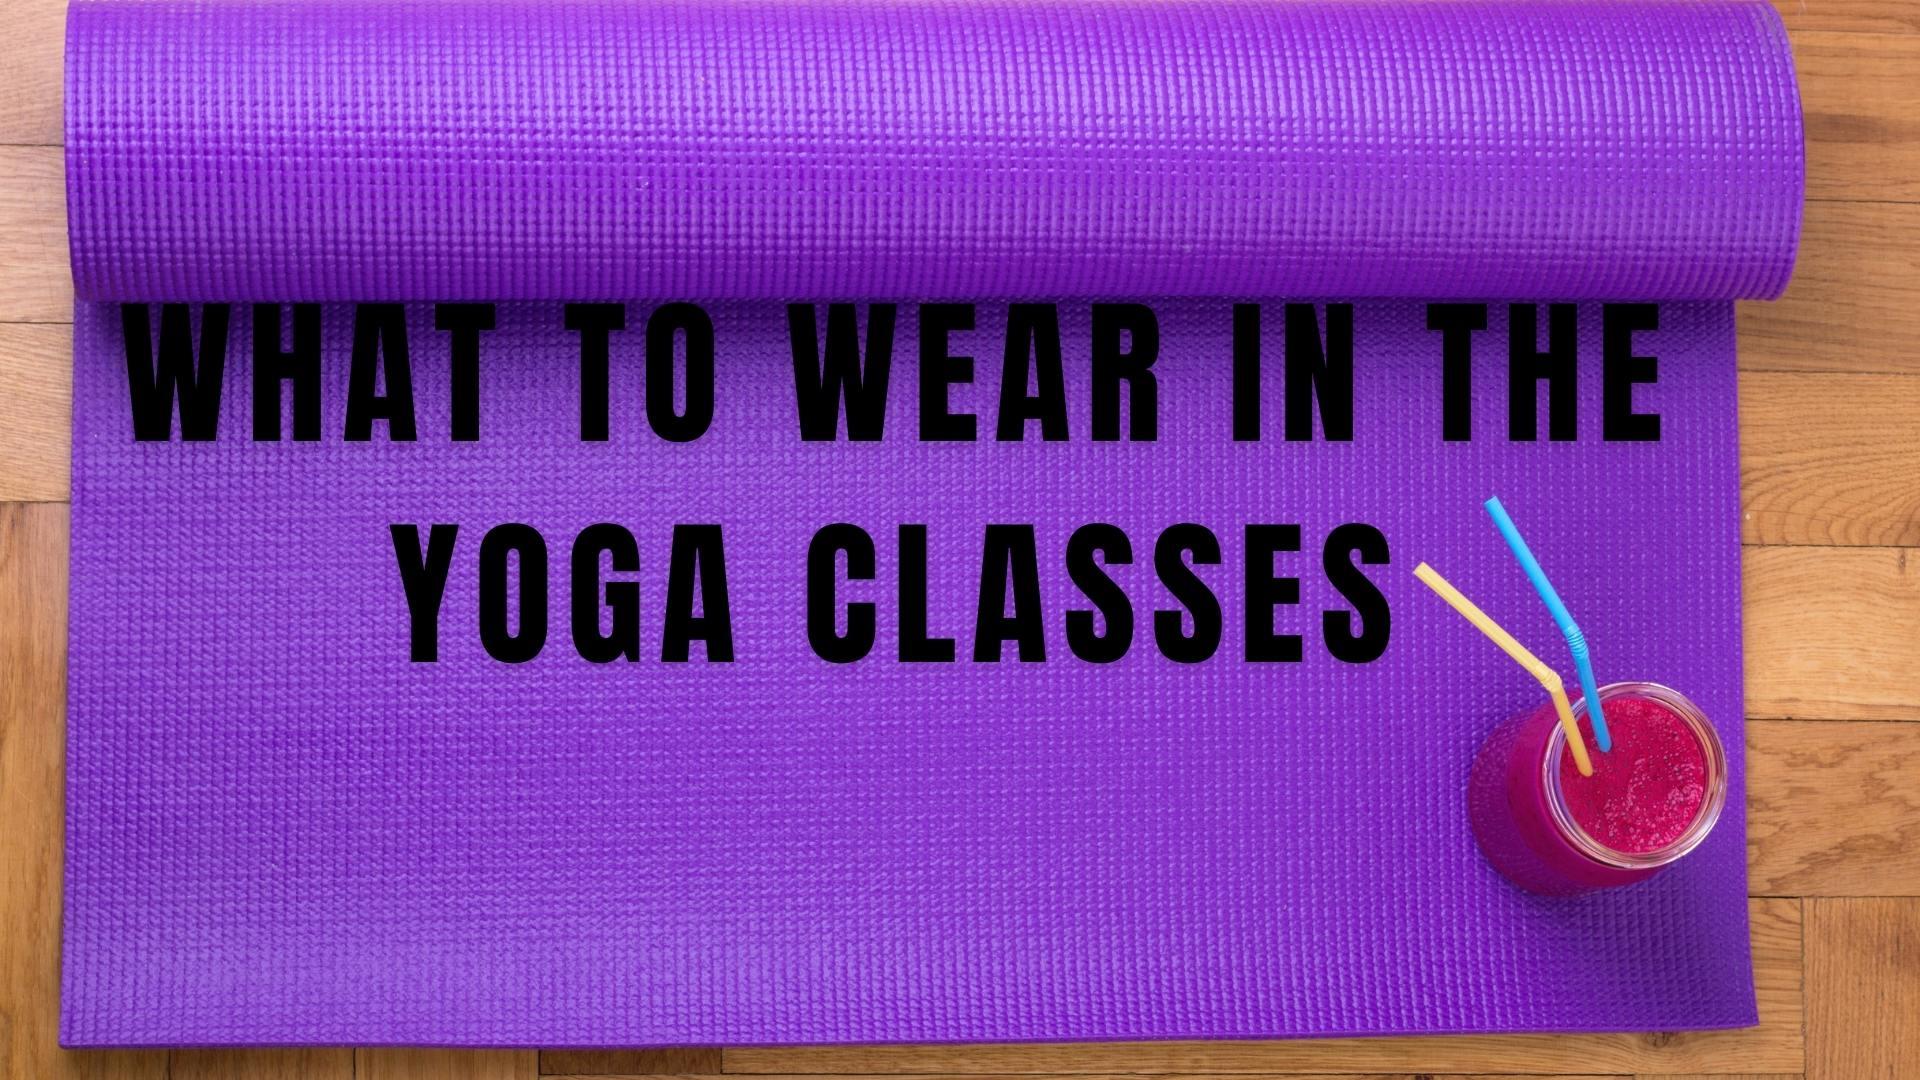 What to Wear in the Yoga Classes